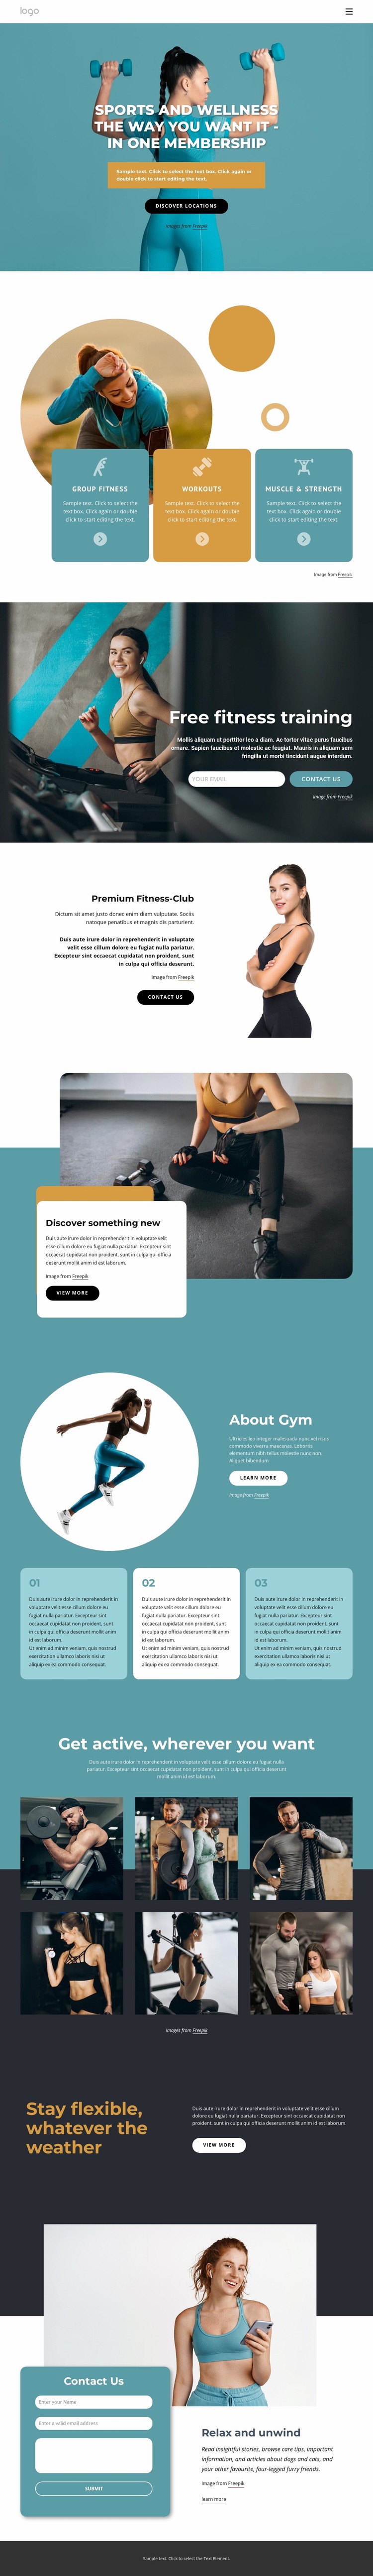 Workout anywhere with one membership Website Builder Templates